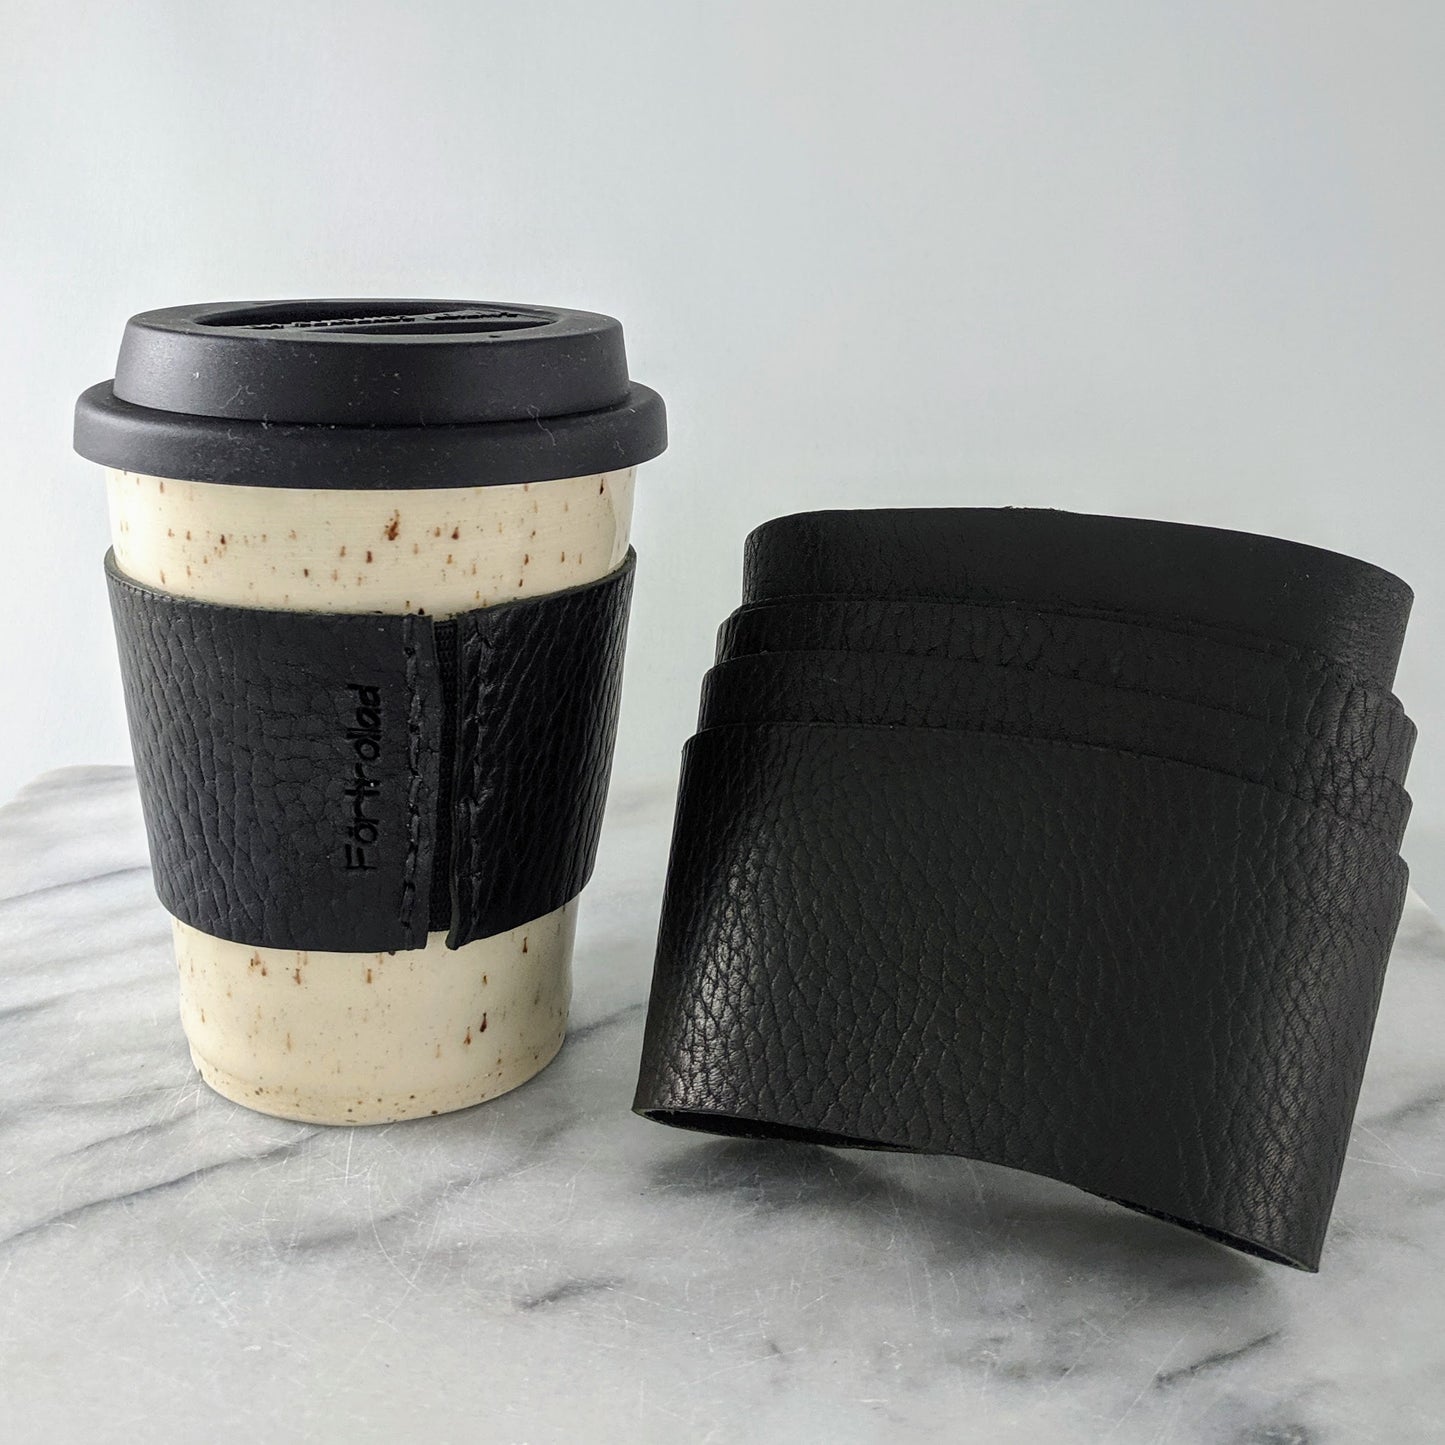 Black leather sleeves for travel mugs, used to protect your hand from the warm ceramic mug during use.